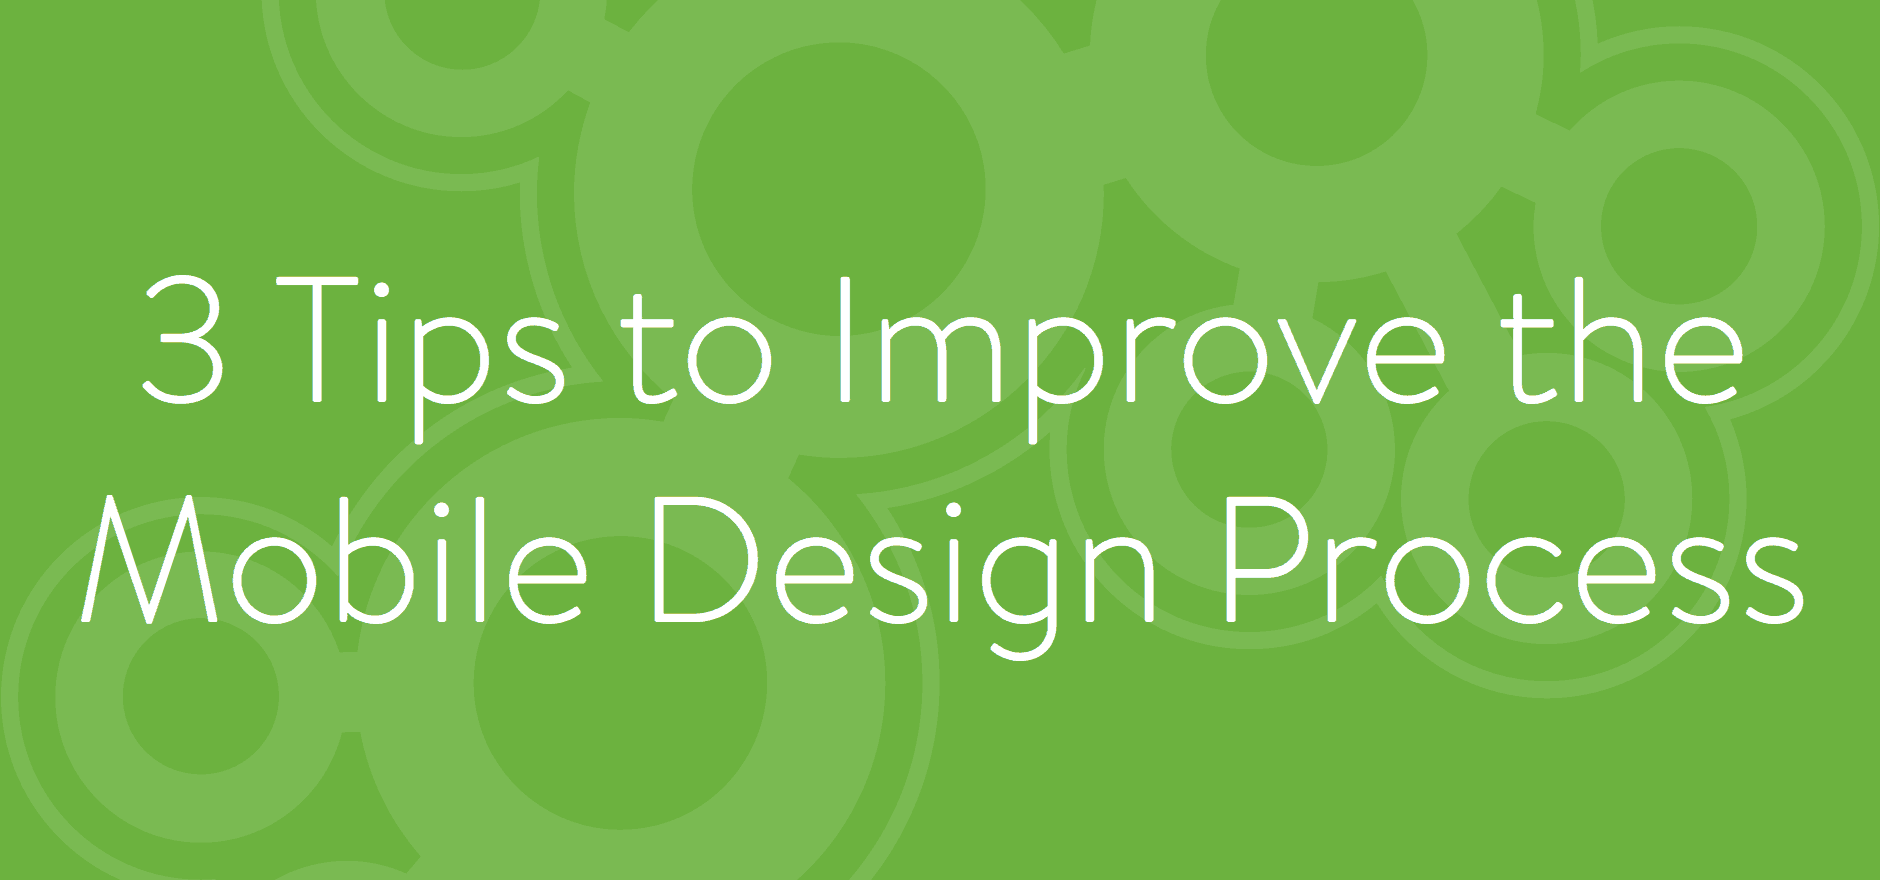 Designing For Mobile: 3 Tips To Improve Your Process